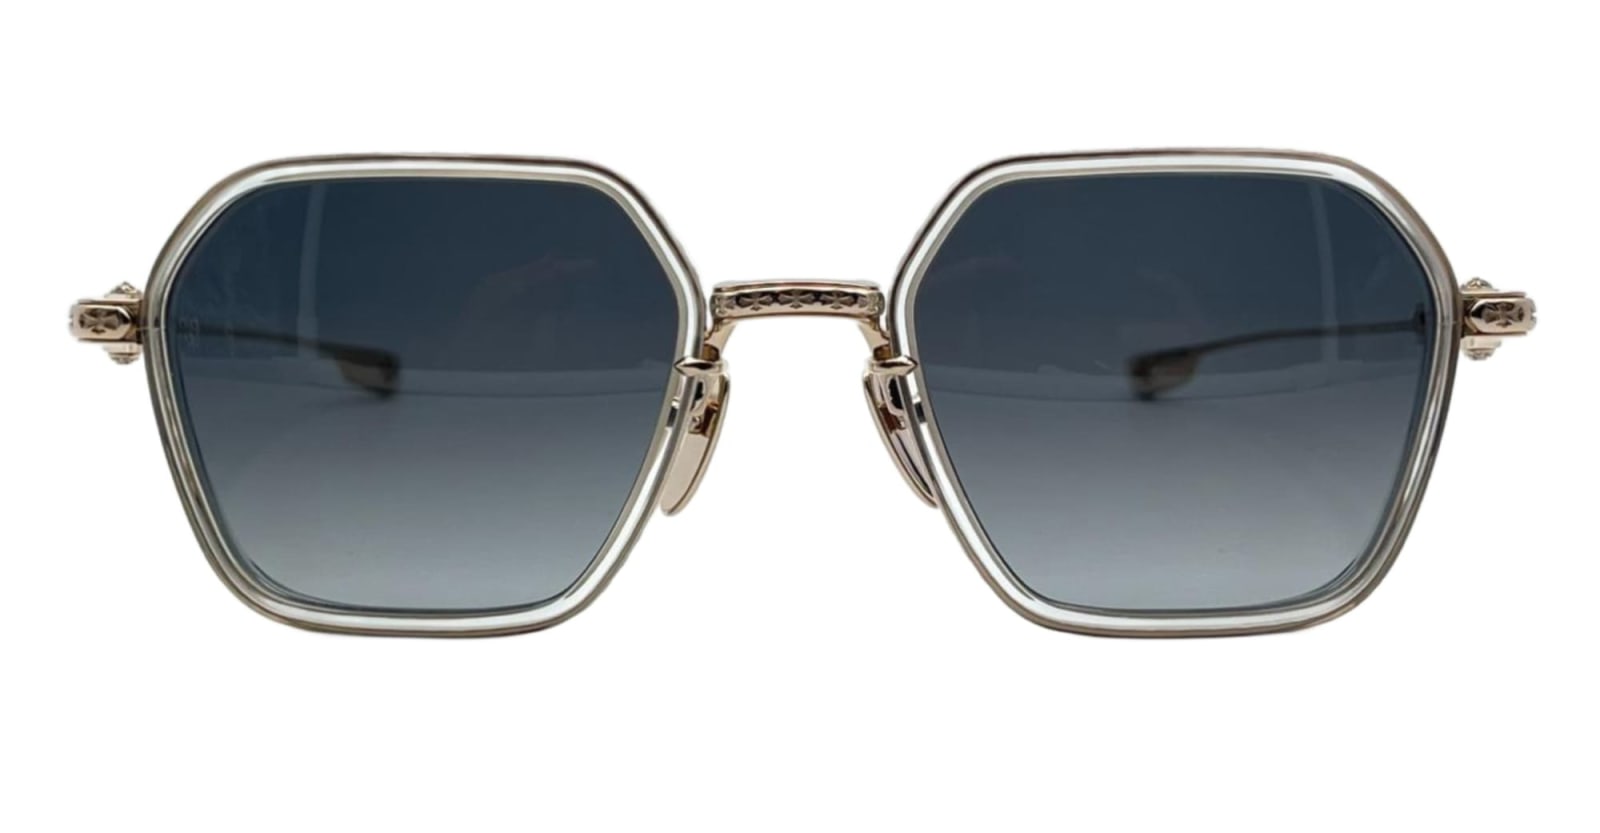 Danger Zone - Crystal / Gold Plated Sunglasses